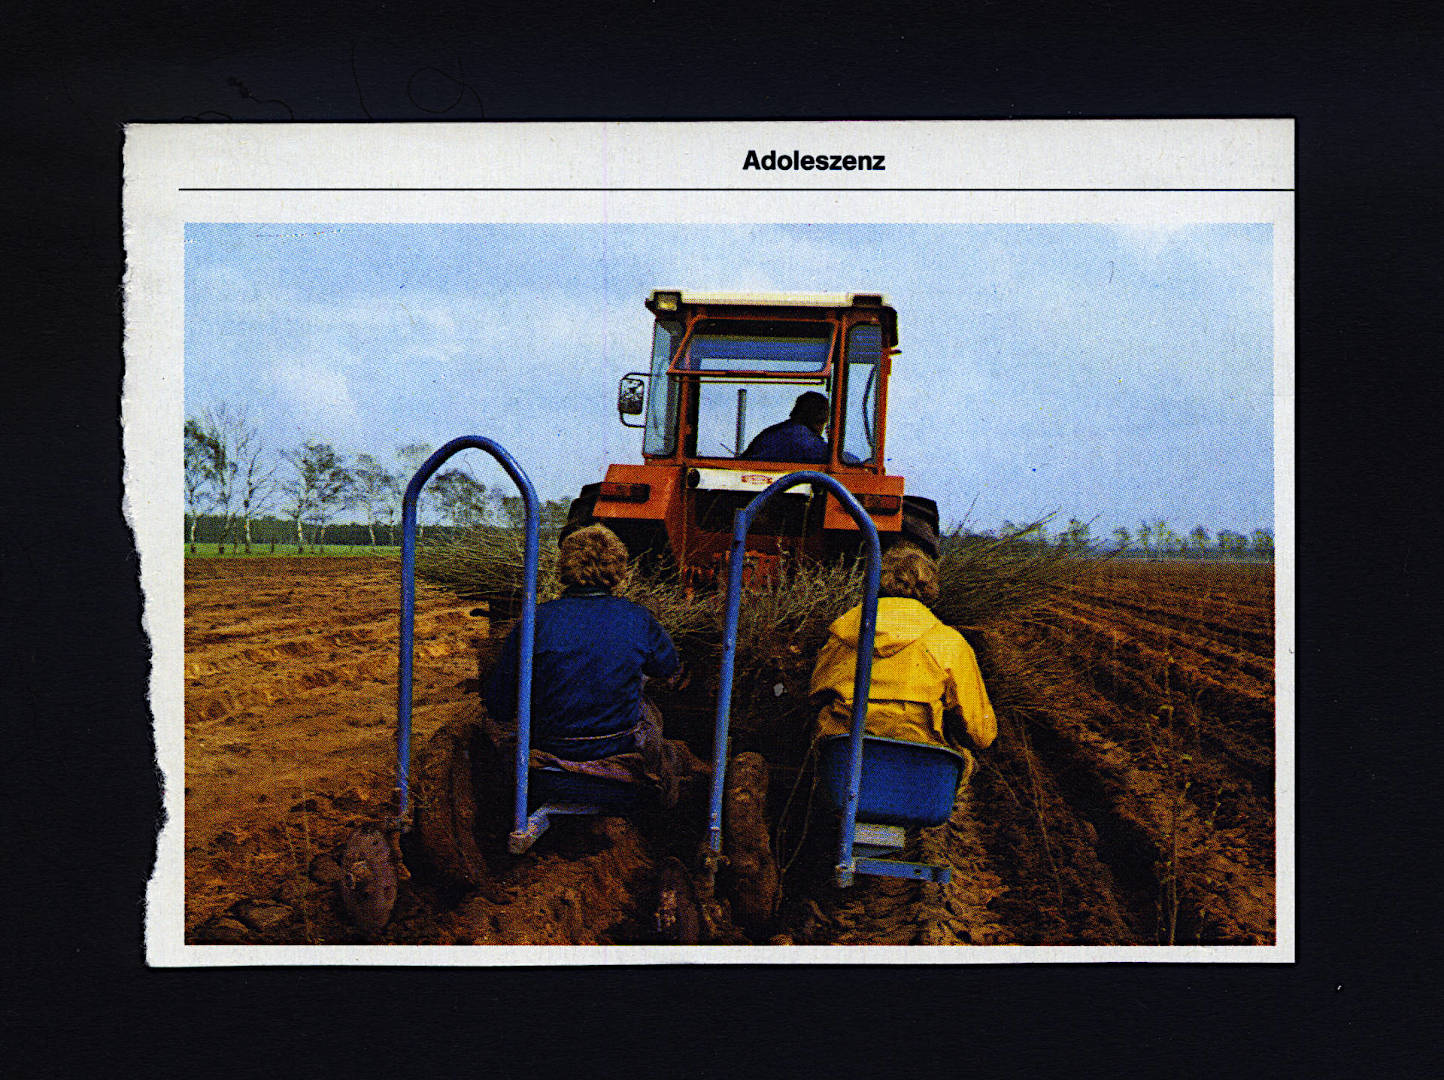 cut out page of a printed lexicon book, the page for Adolescence. theres a picture of two people sitting on a farming device behind a truck on a field doing farm work.